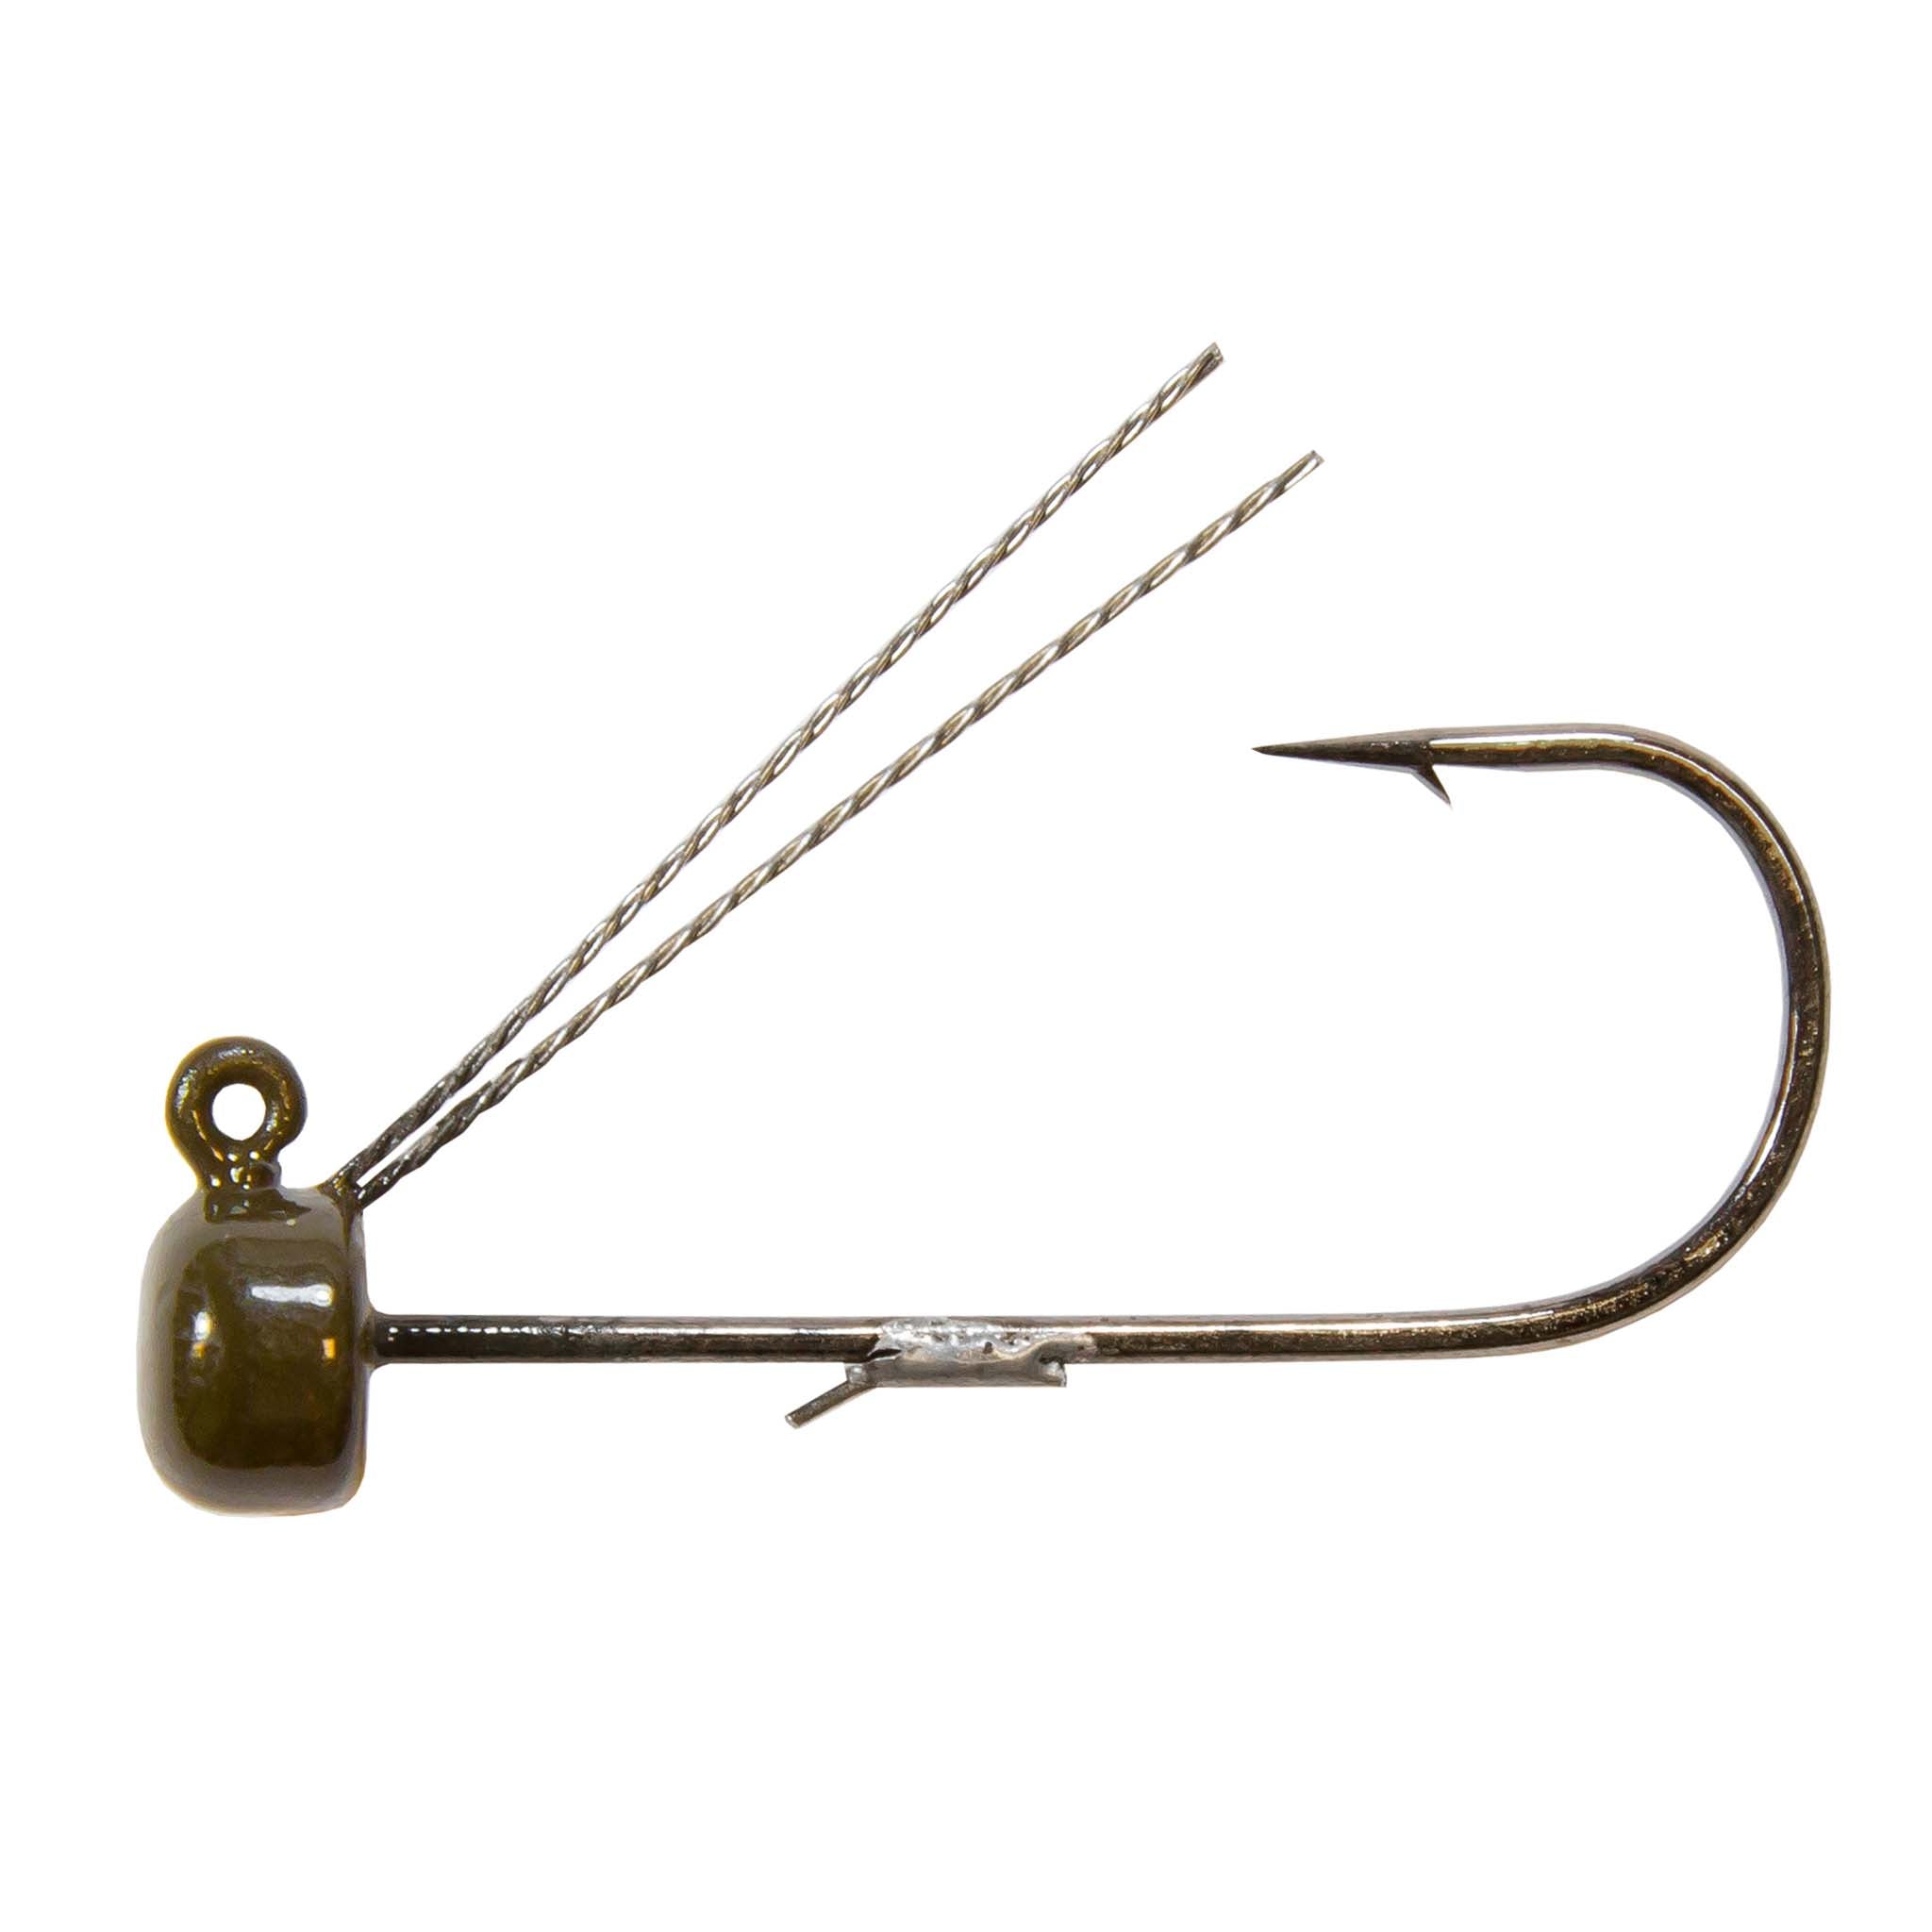 Z-Man Weedless Jig Head Review (Top Pros & Cons)